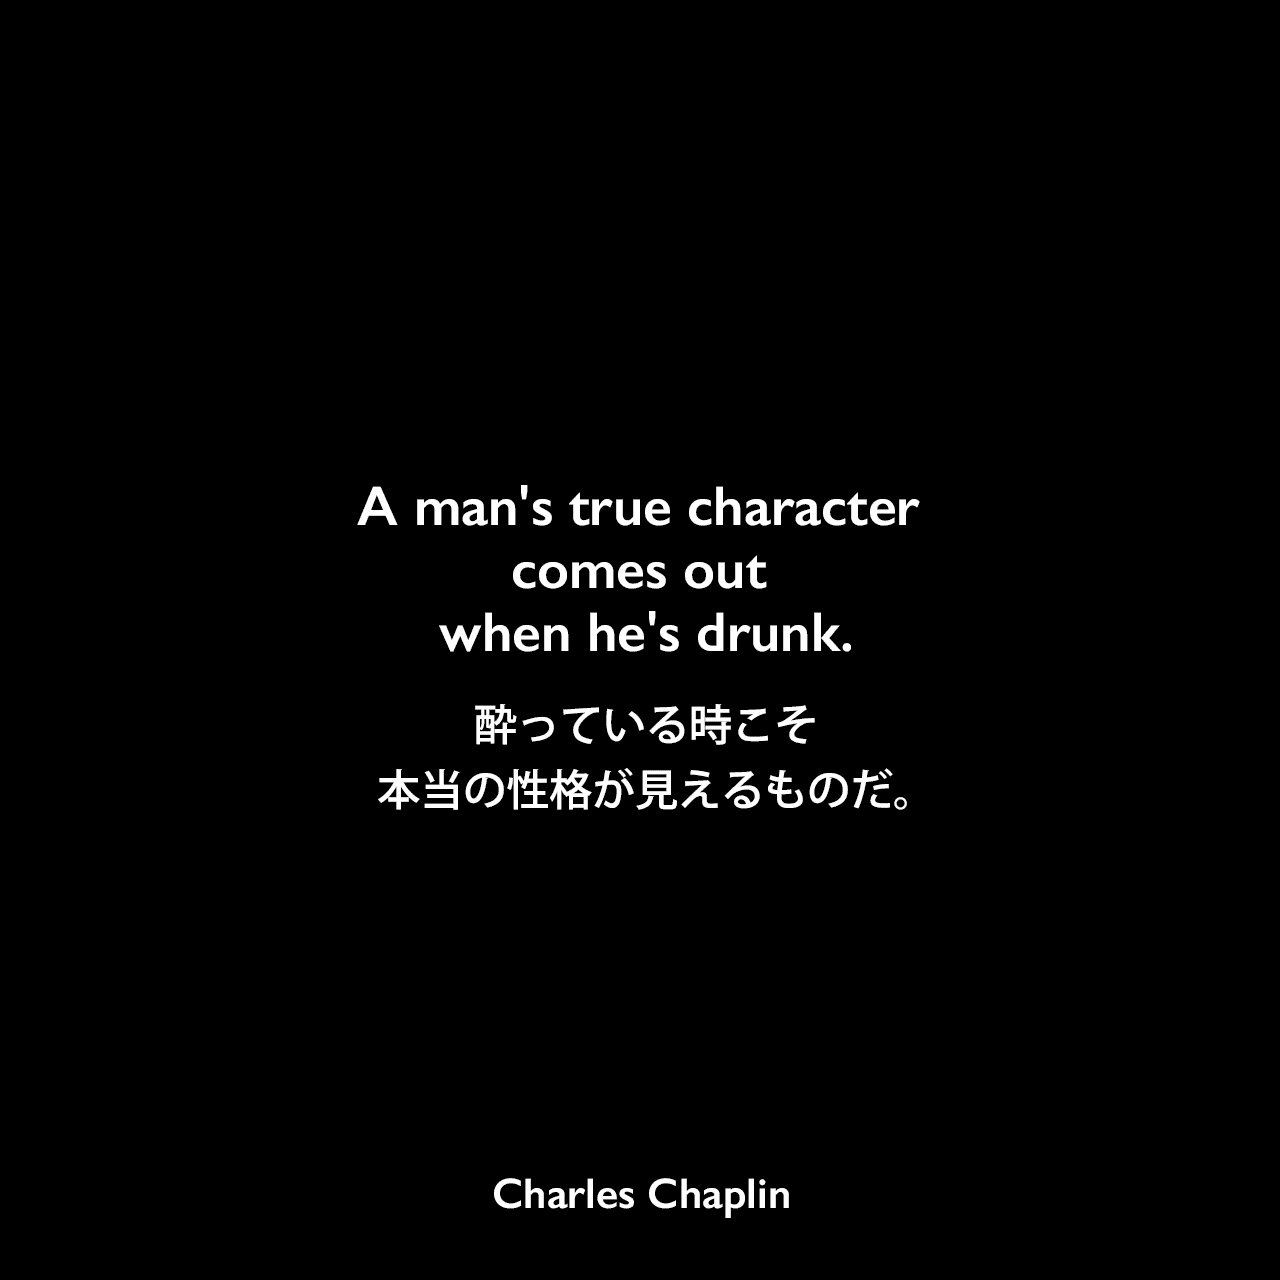 A man's true character comes out when he's drunk.酔っている時こそ本当の性格が見えるものだ。Charles Chaplin